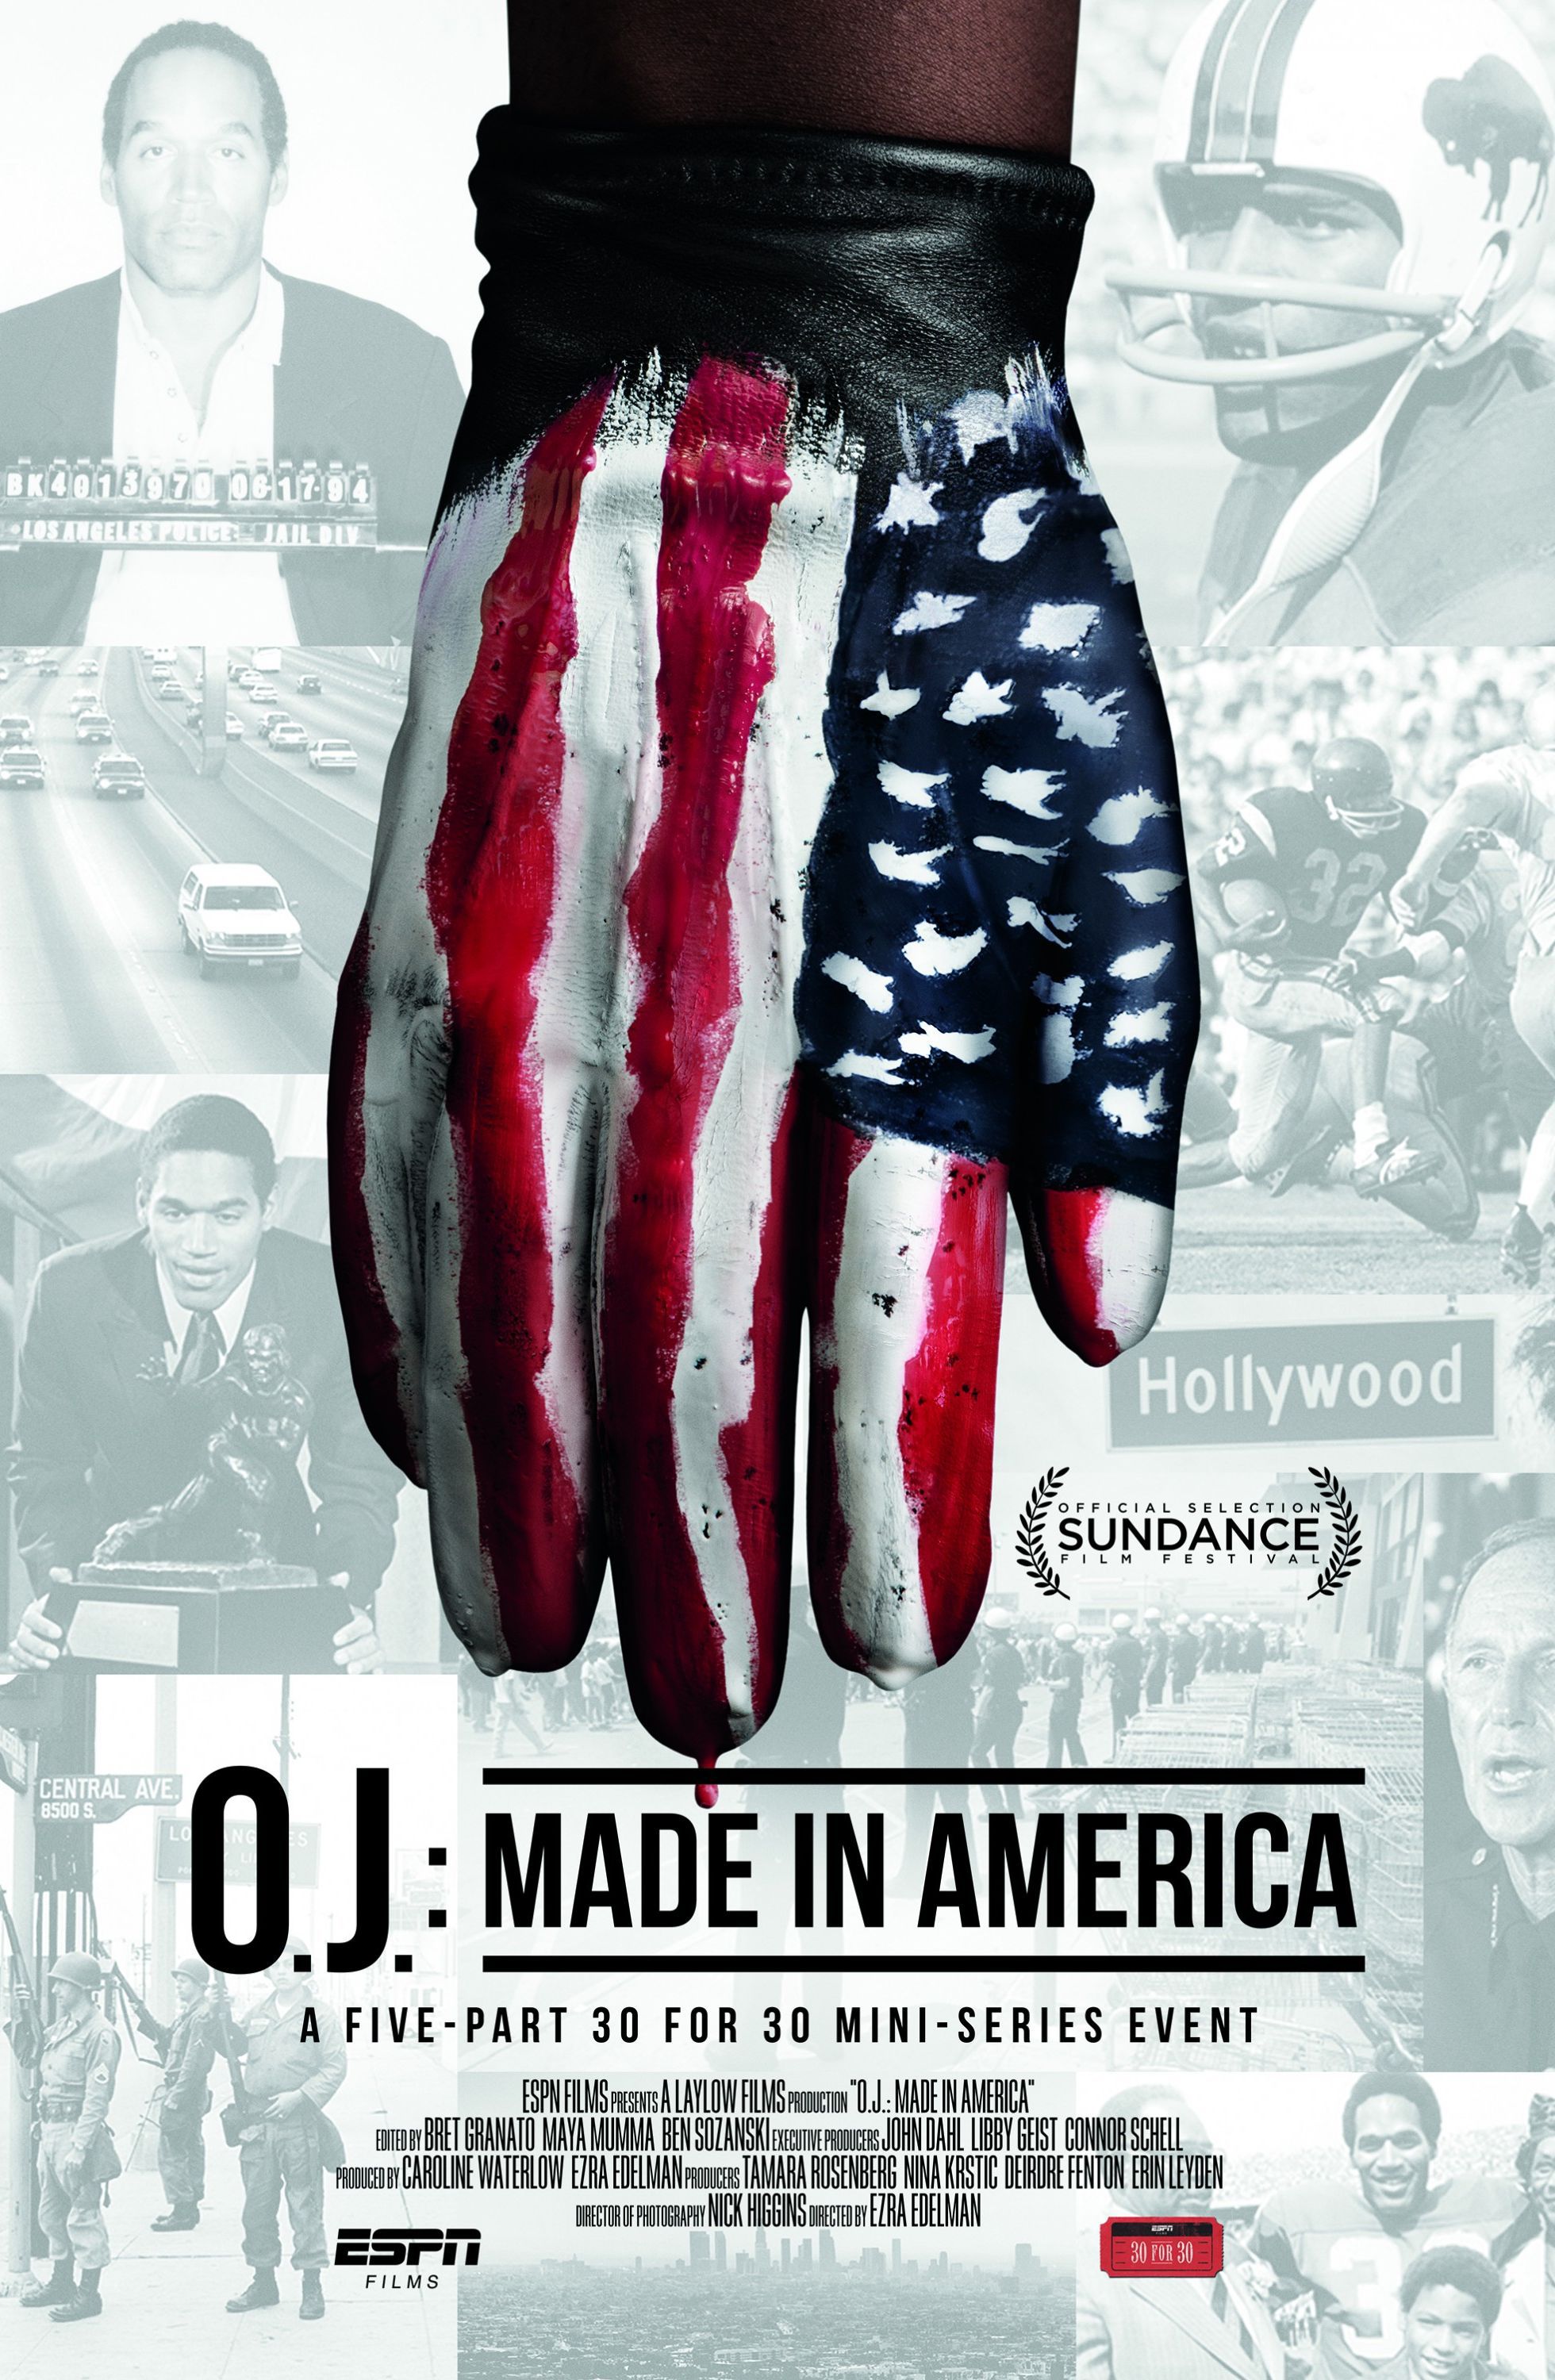 O.J.: Made in America - Série (2016) streaming VF gratuit complet